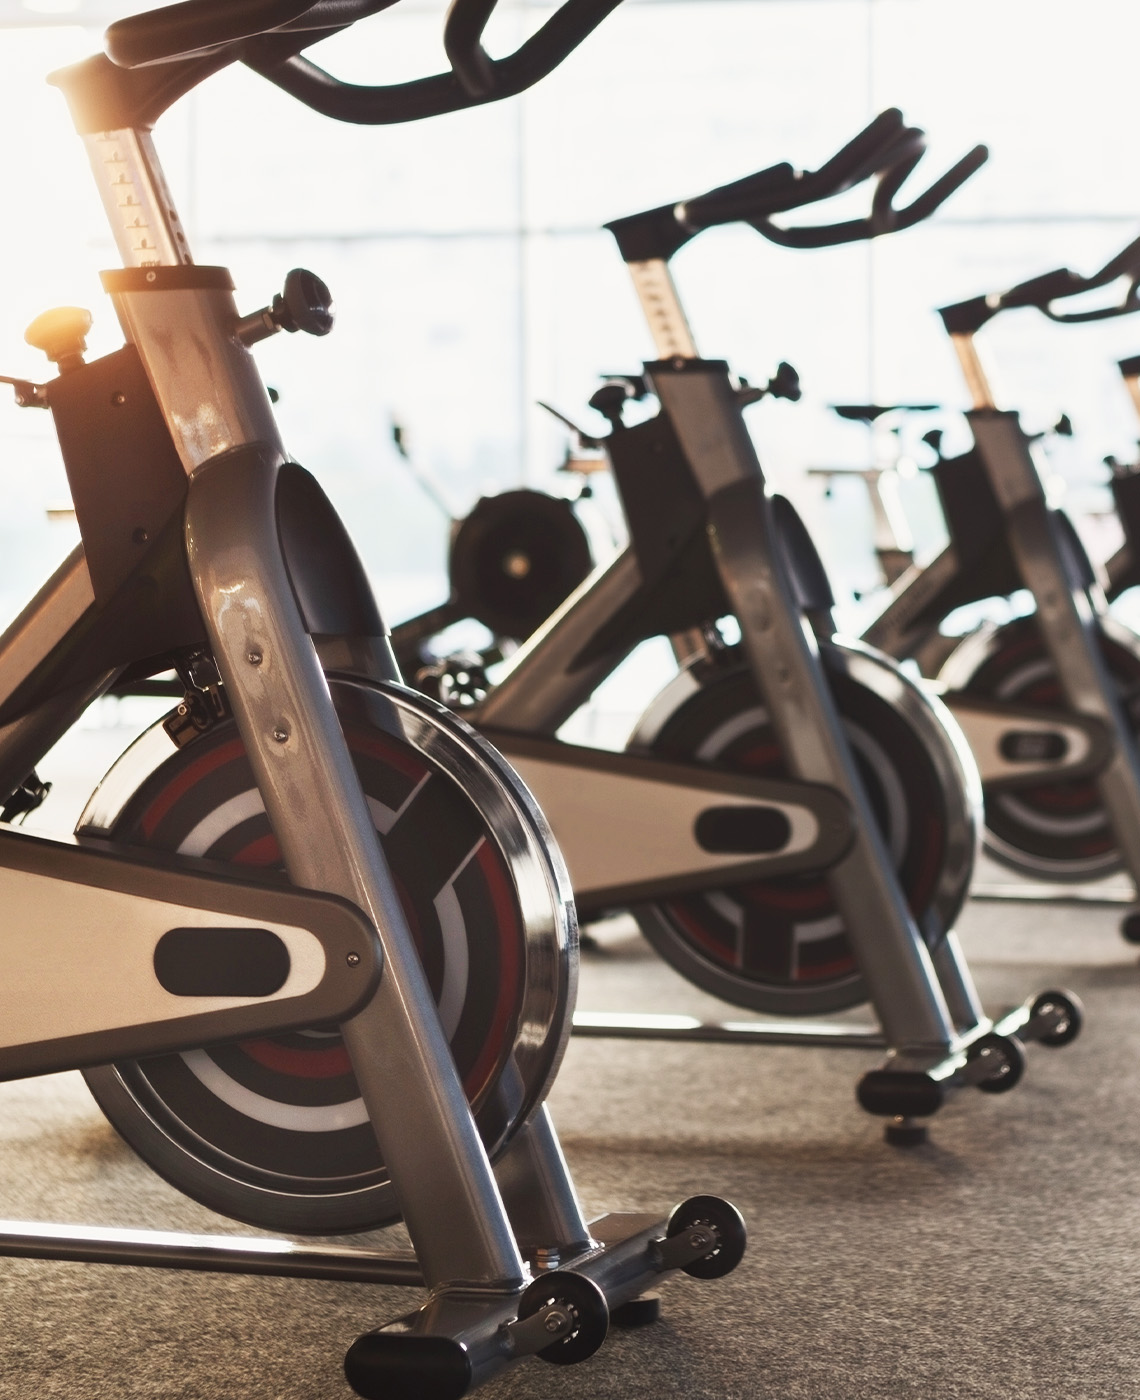 Modern gym interior with fitness exercise bikes